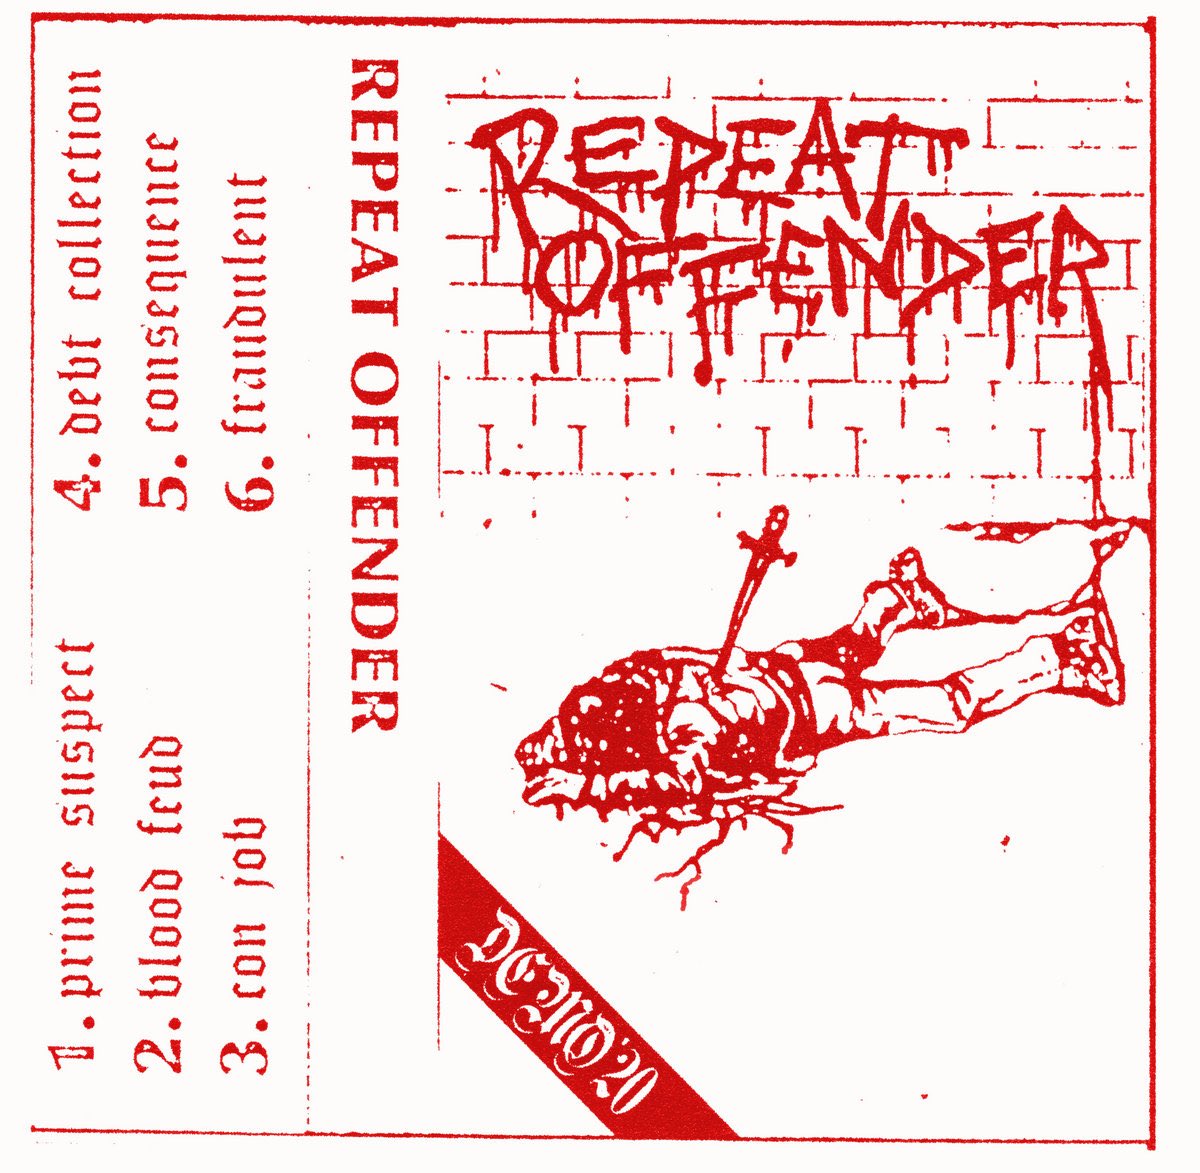 62. Repeat Offender - Demo ‘20 (lol idk where I found this since I don’t know anything about hardcore but I spent the last week of February only listening to this)